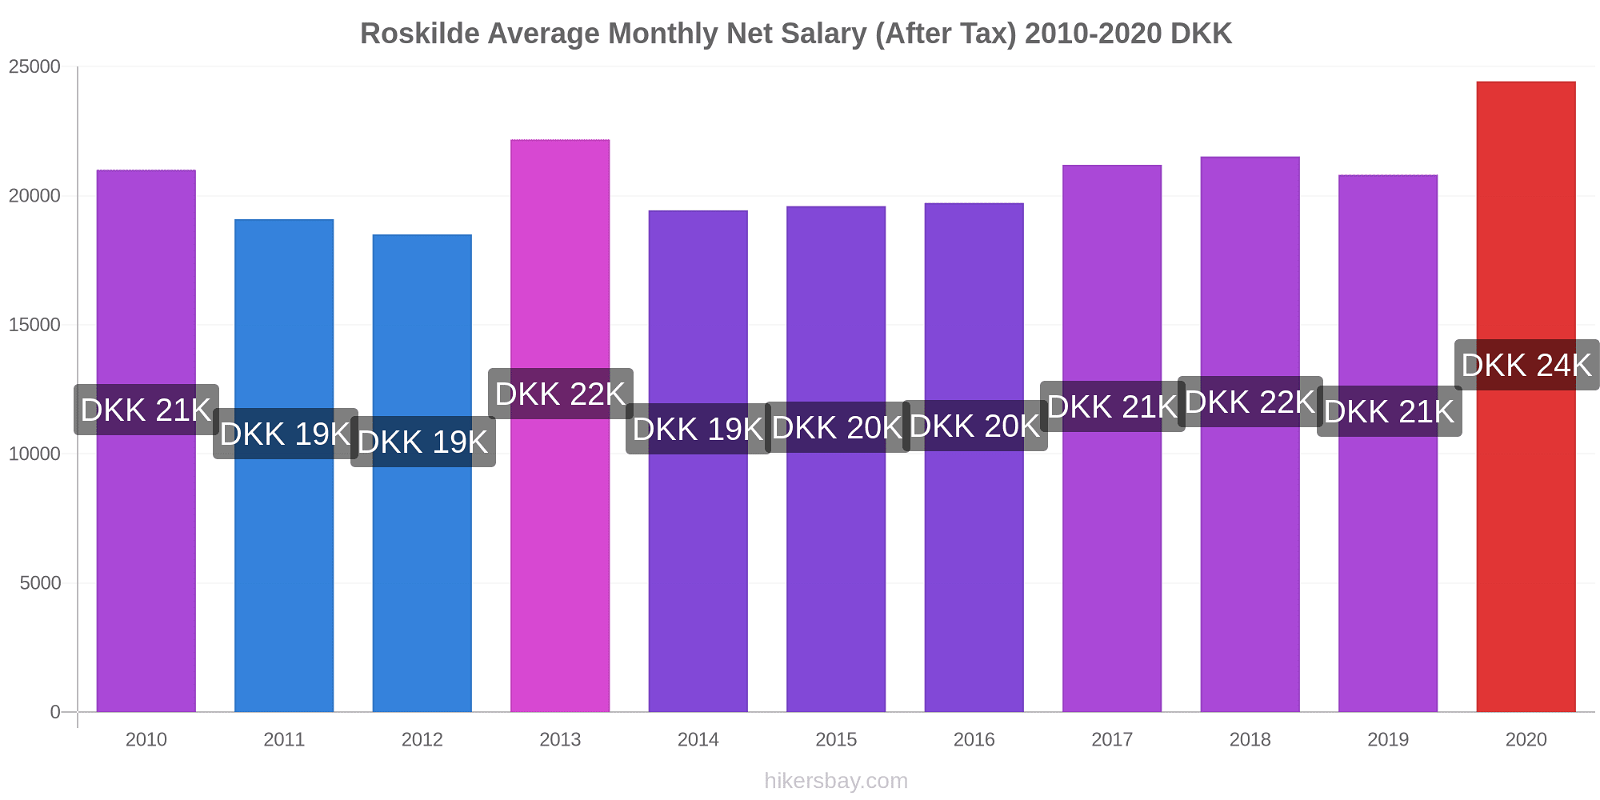 Roskilde price changes Average Monthly Net Salary (After Tax) hikersbay.com